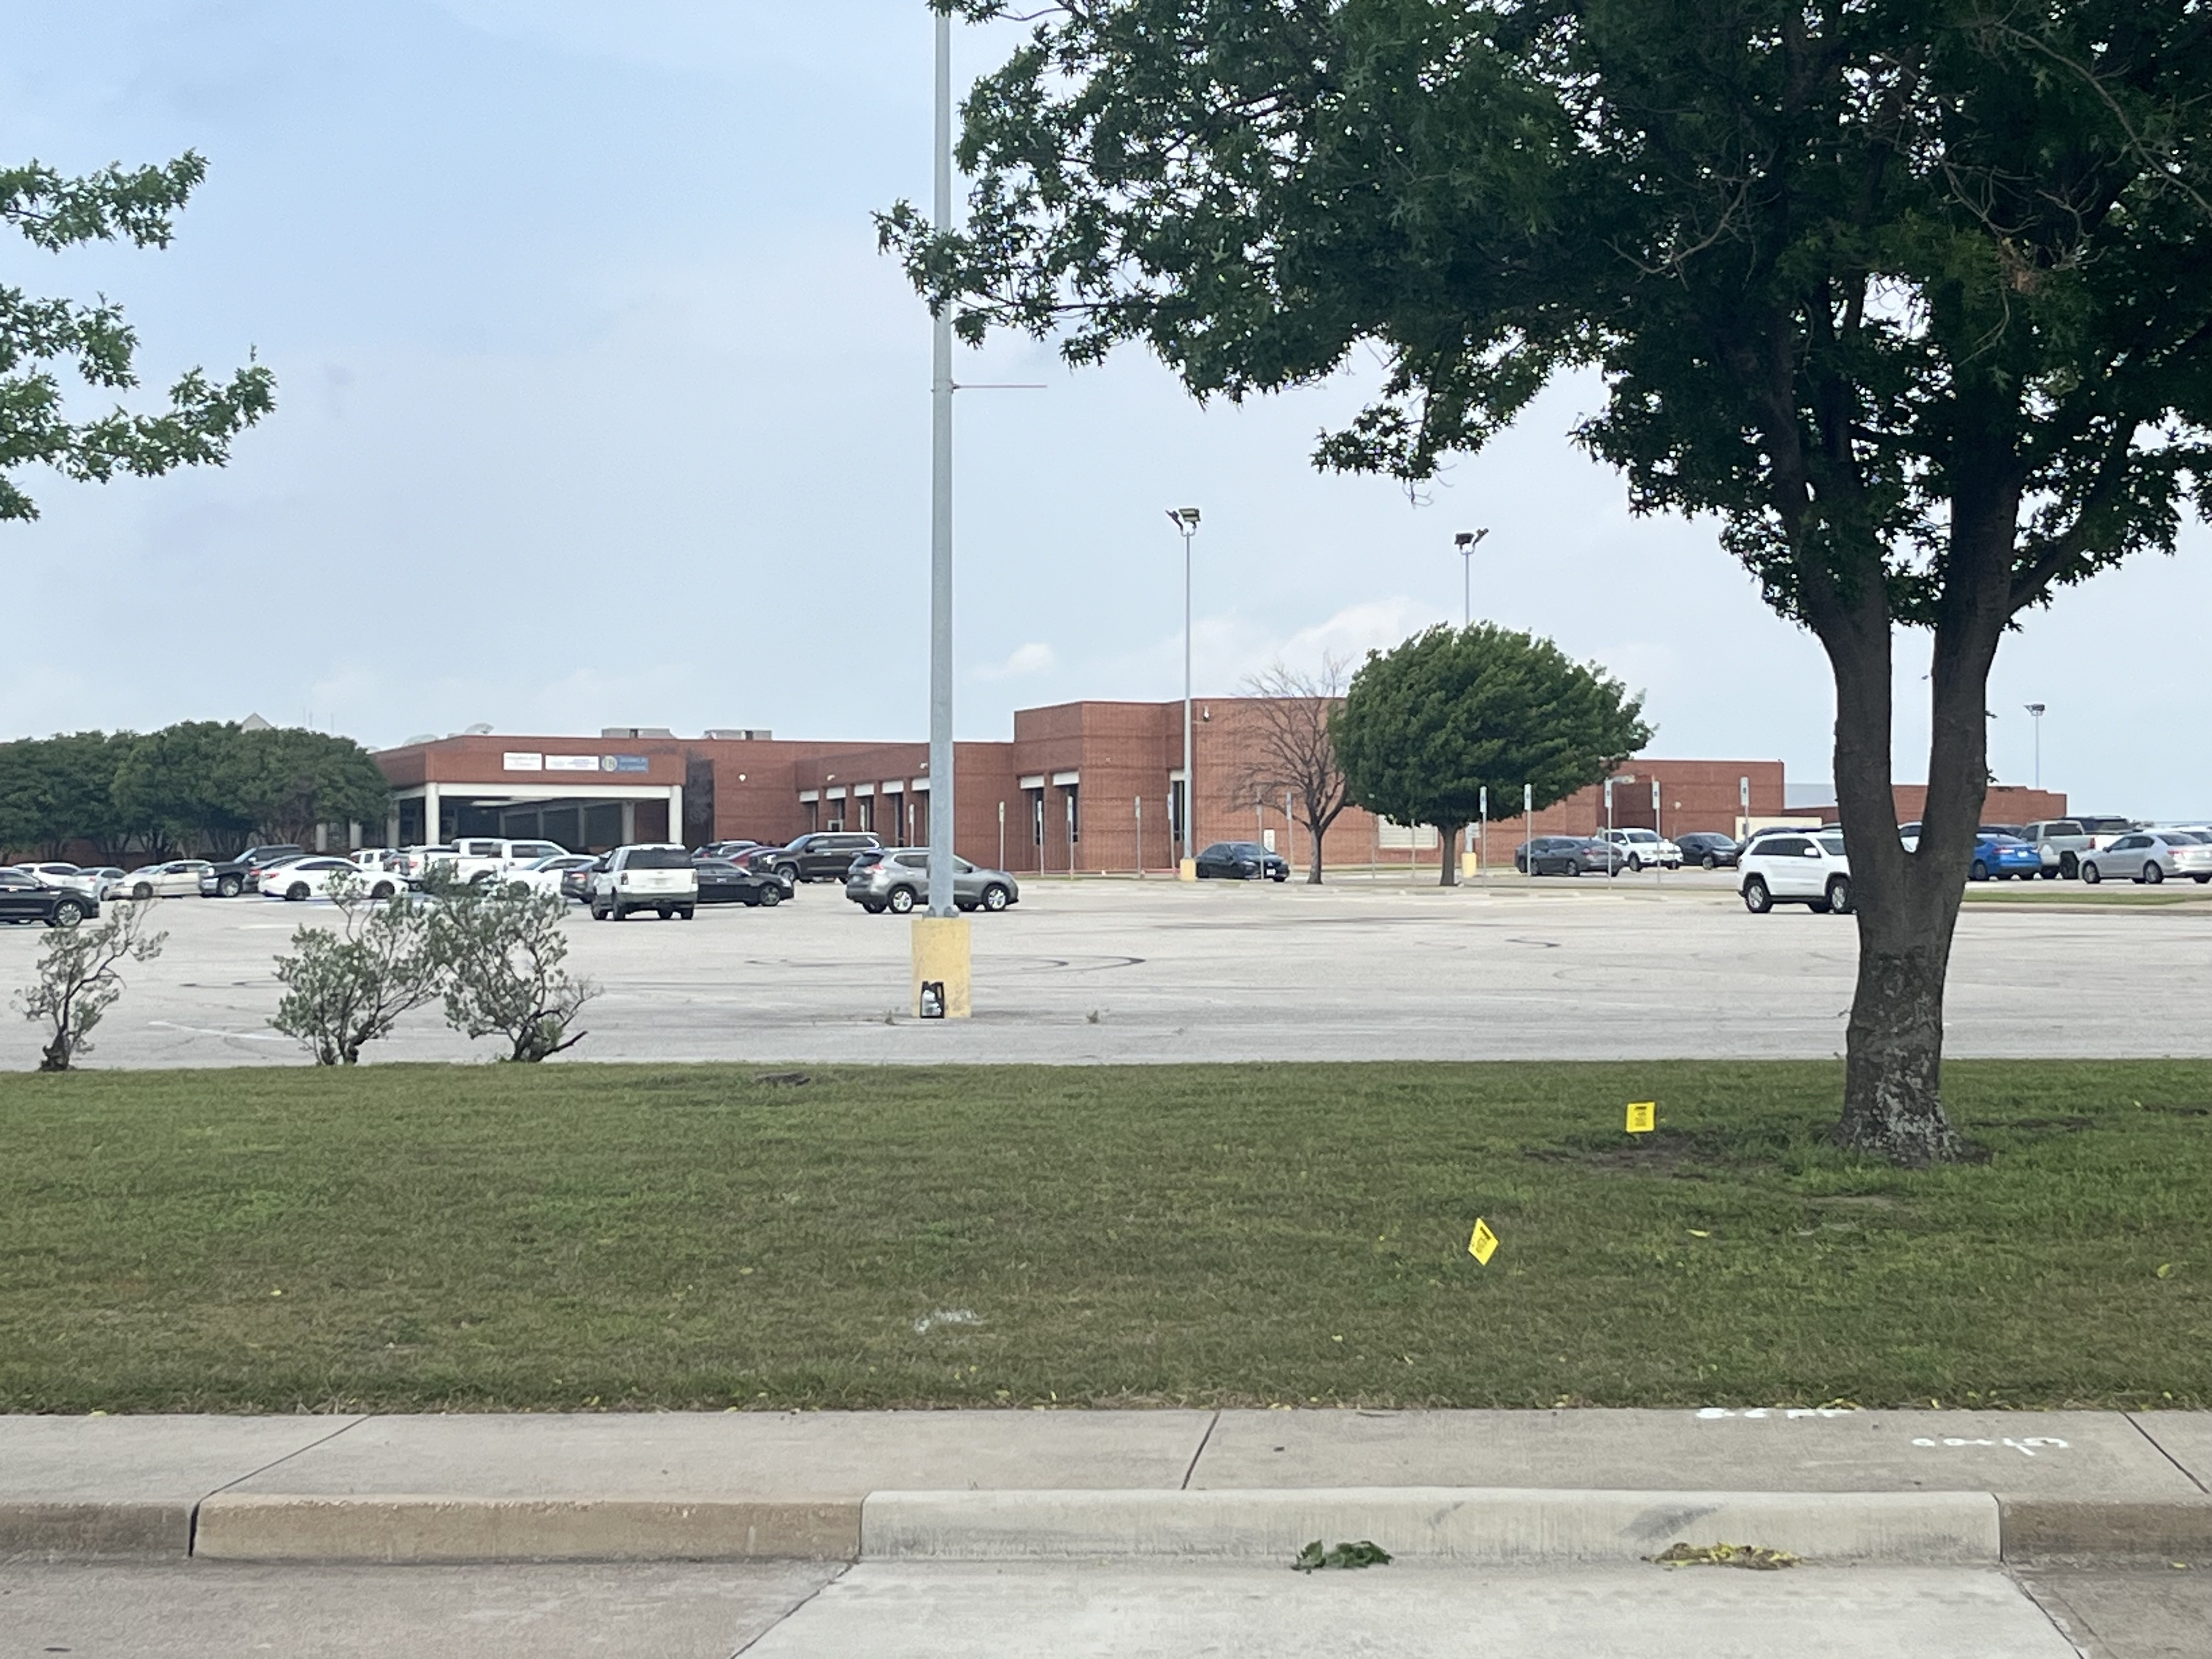 Students retrieve belongings from Bowie High School before classes resume Monday